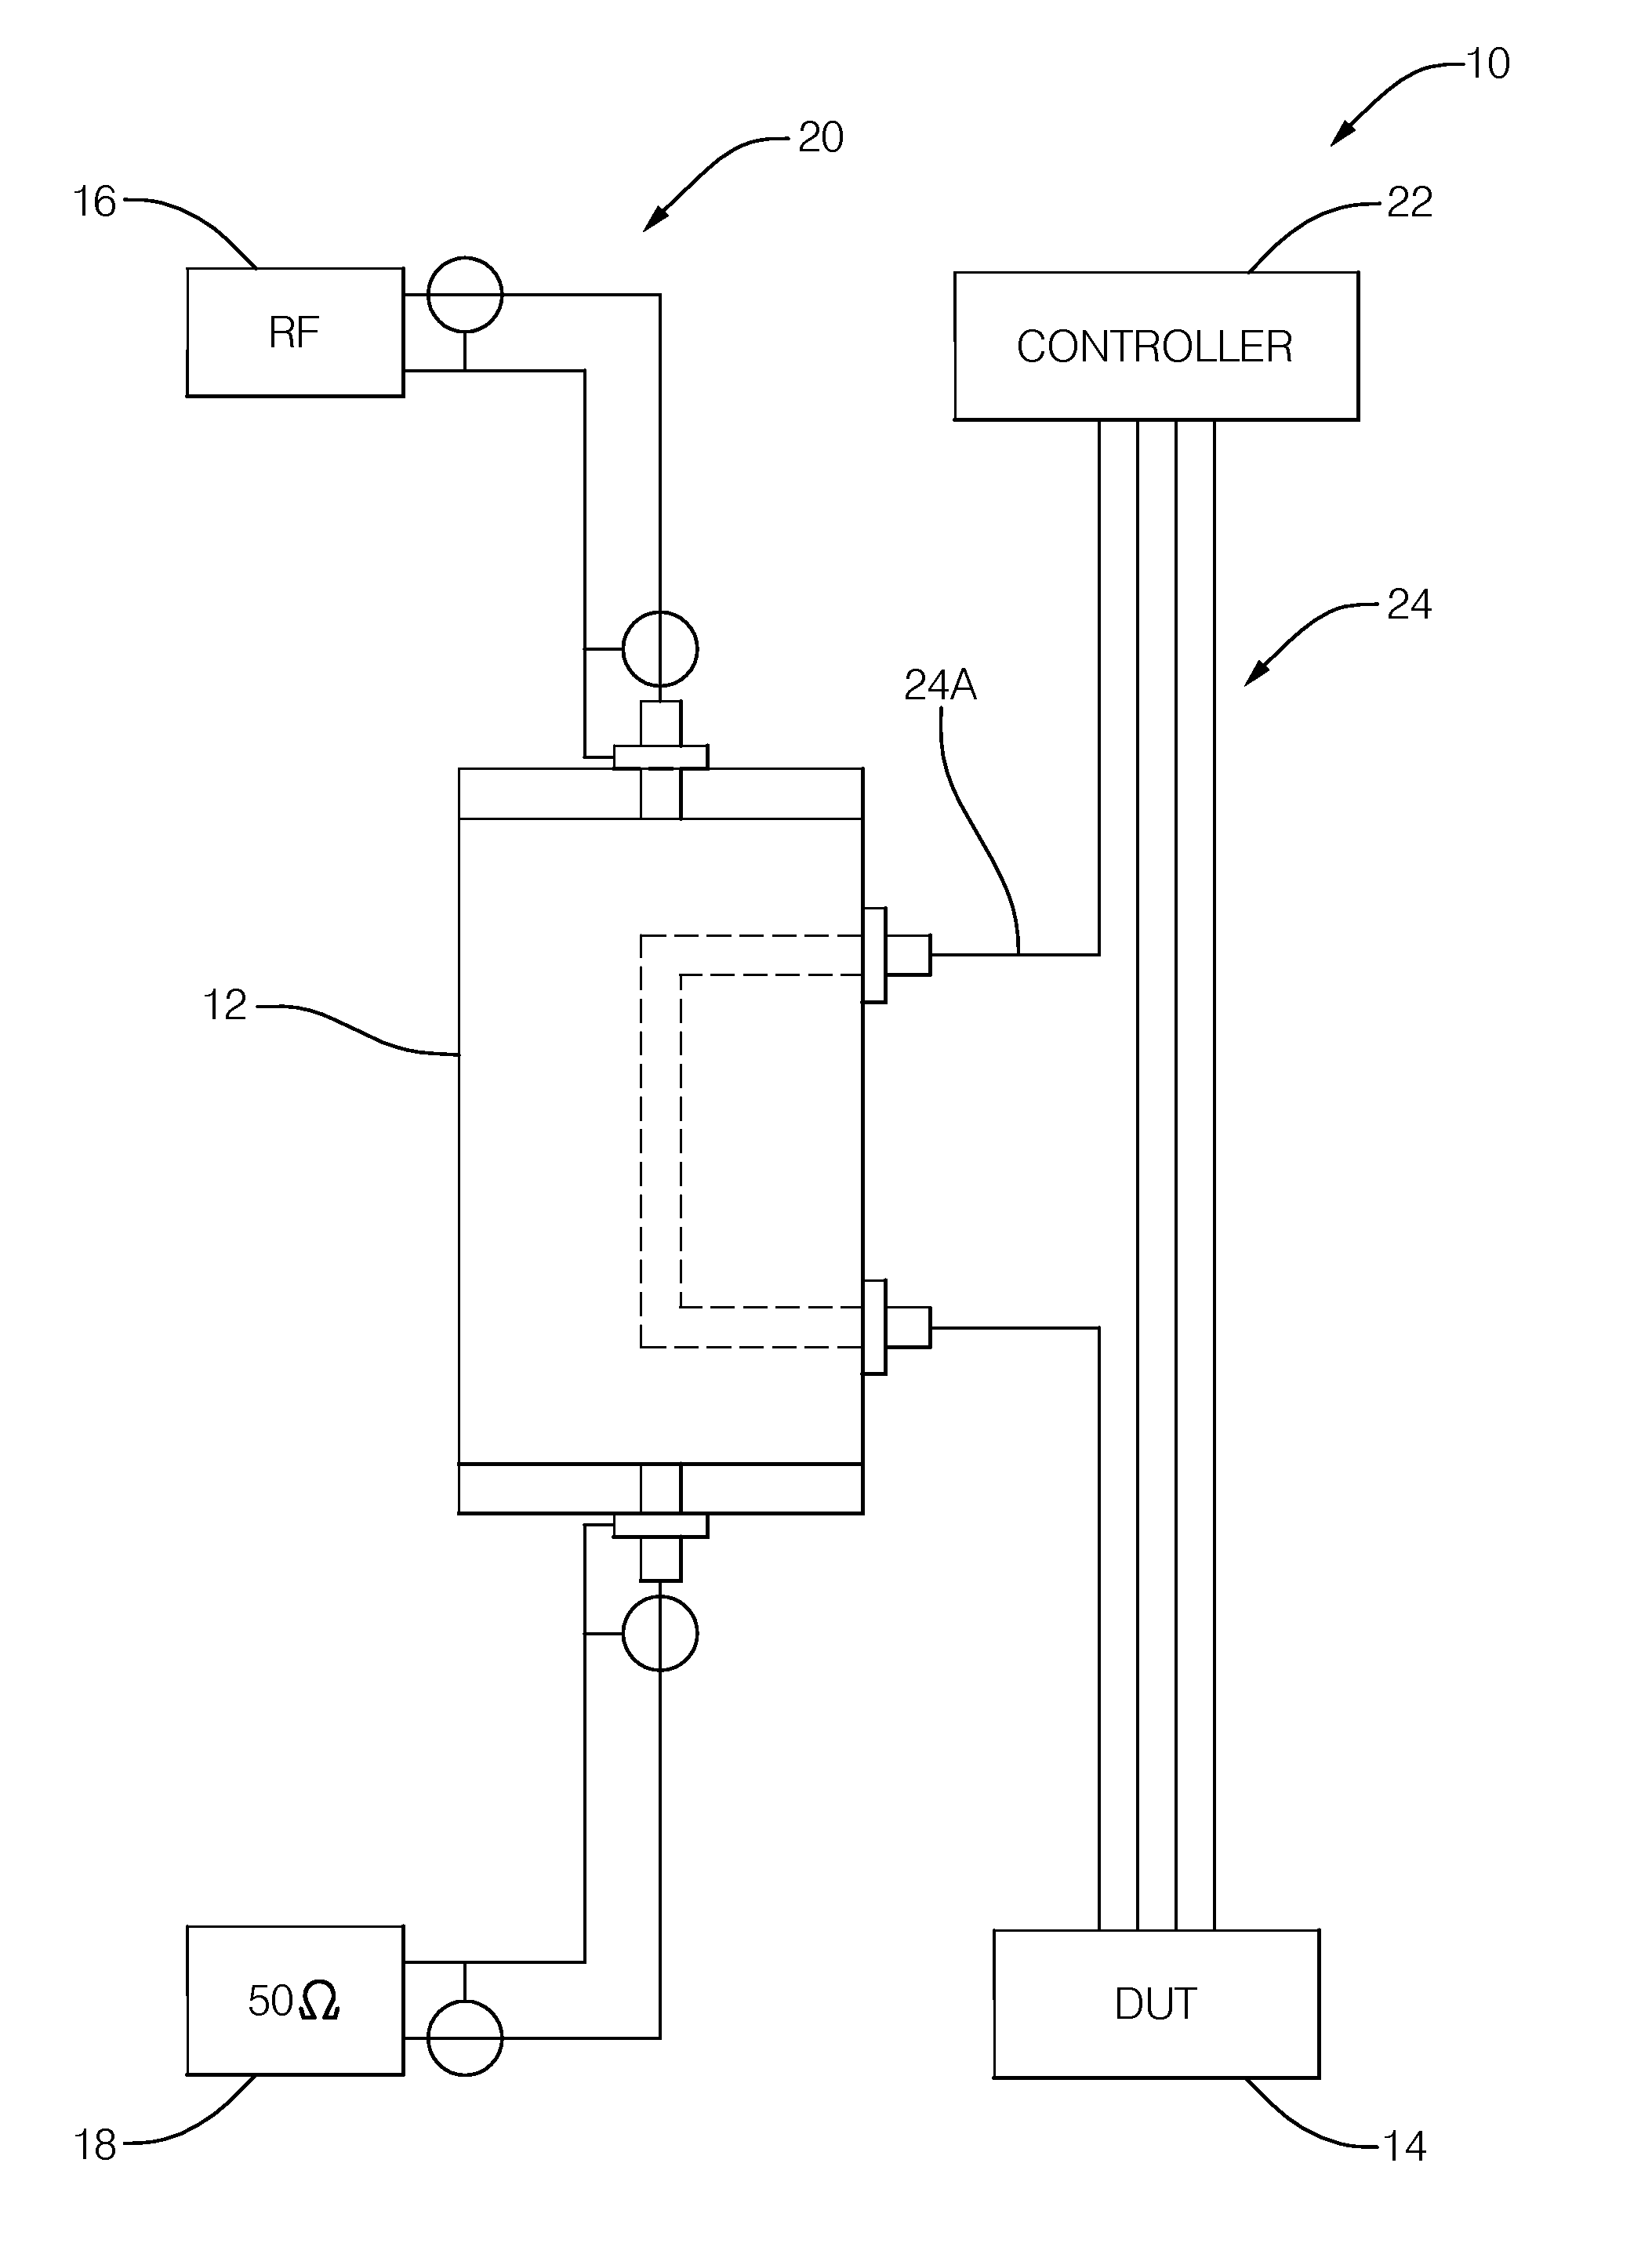 Electromagnetic interference (EMI) test apparatus